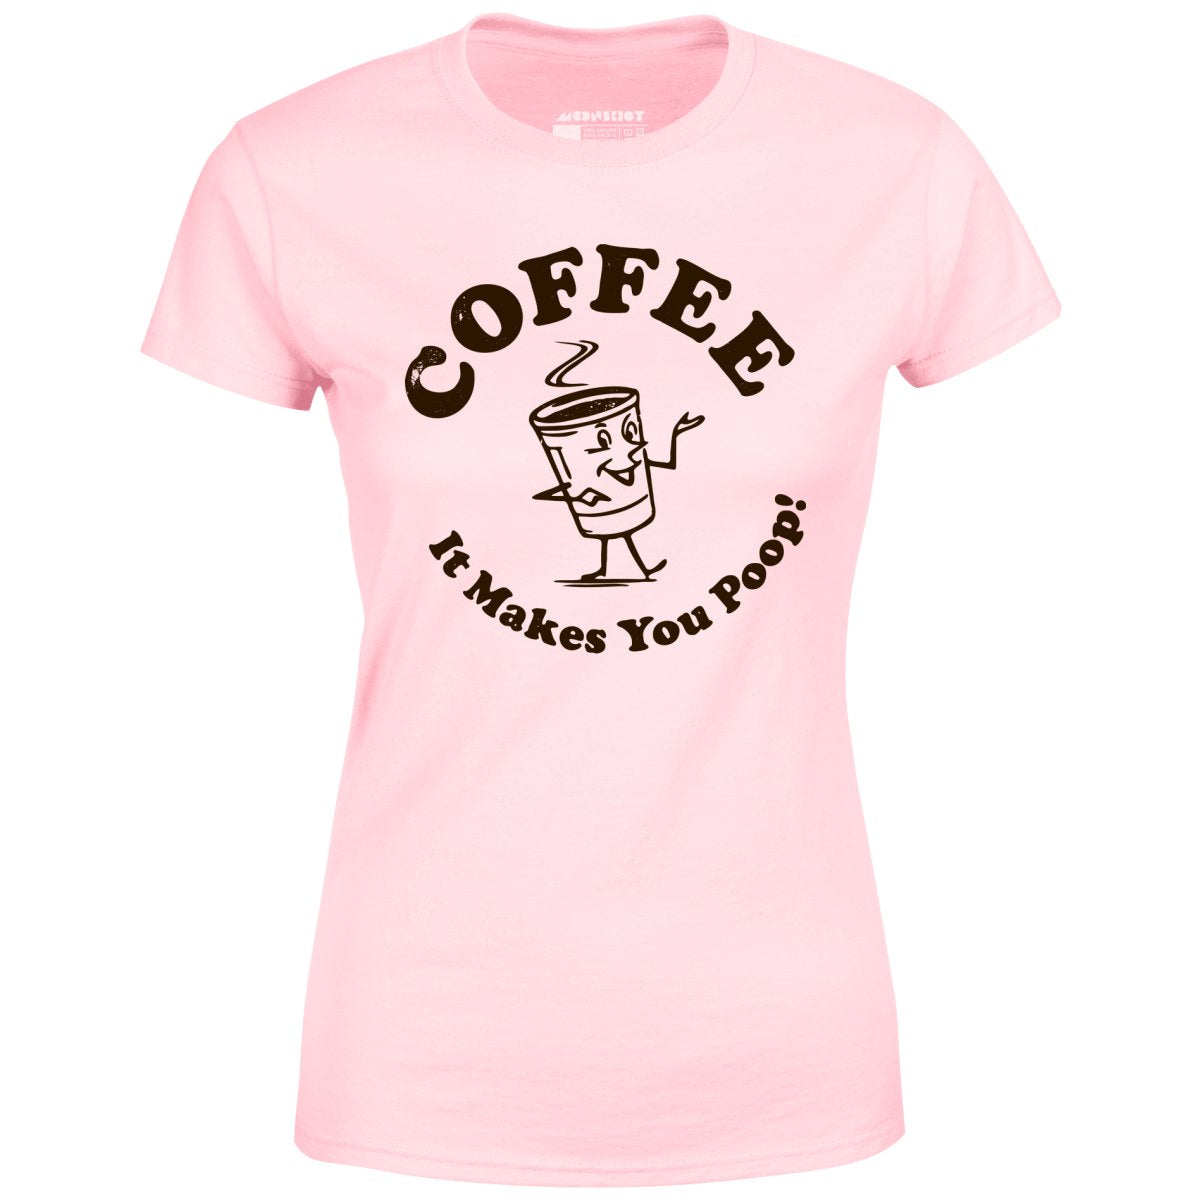 Coffee - It Makes You Poop! - Women's T-Shirt